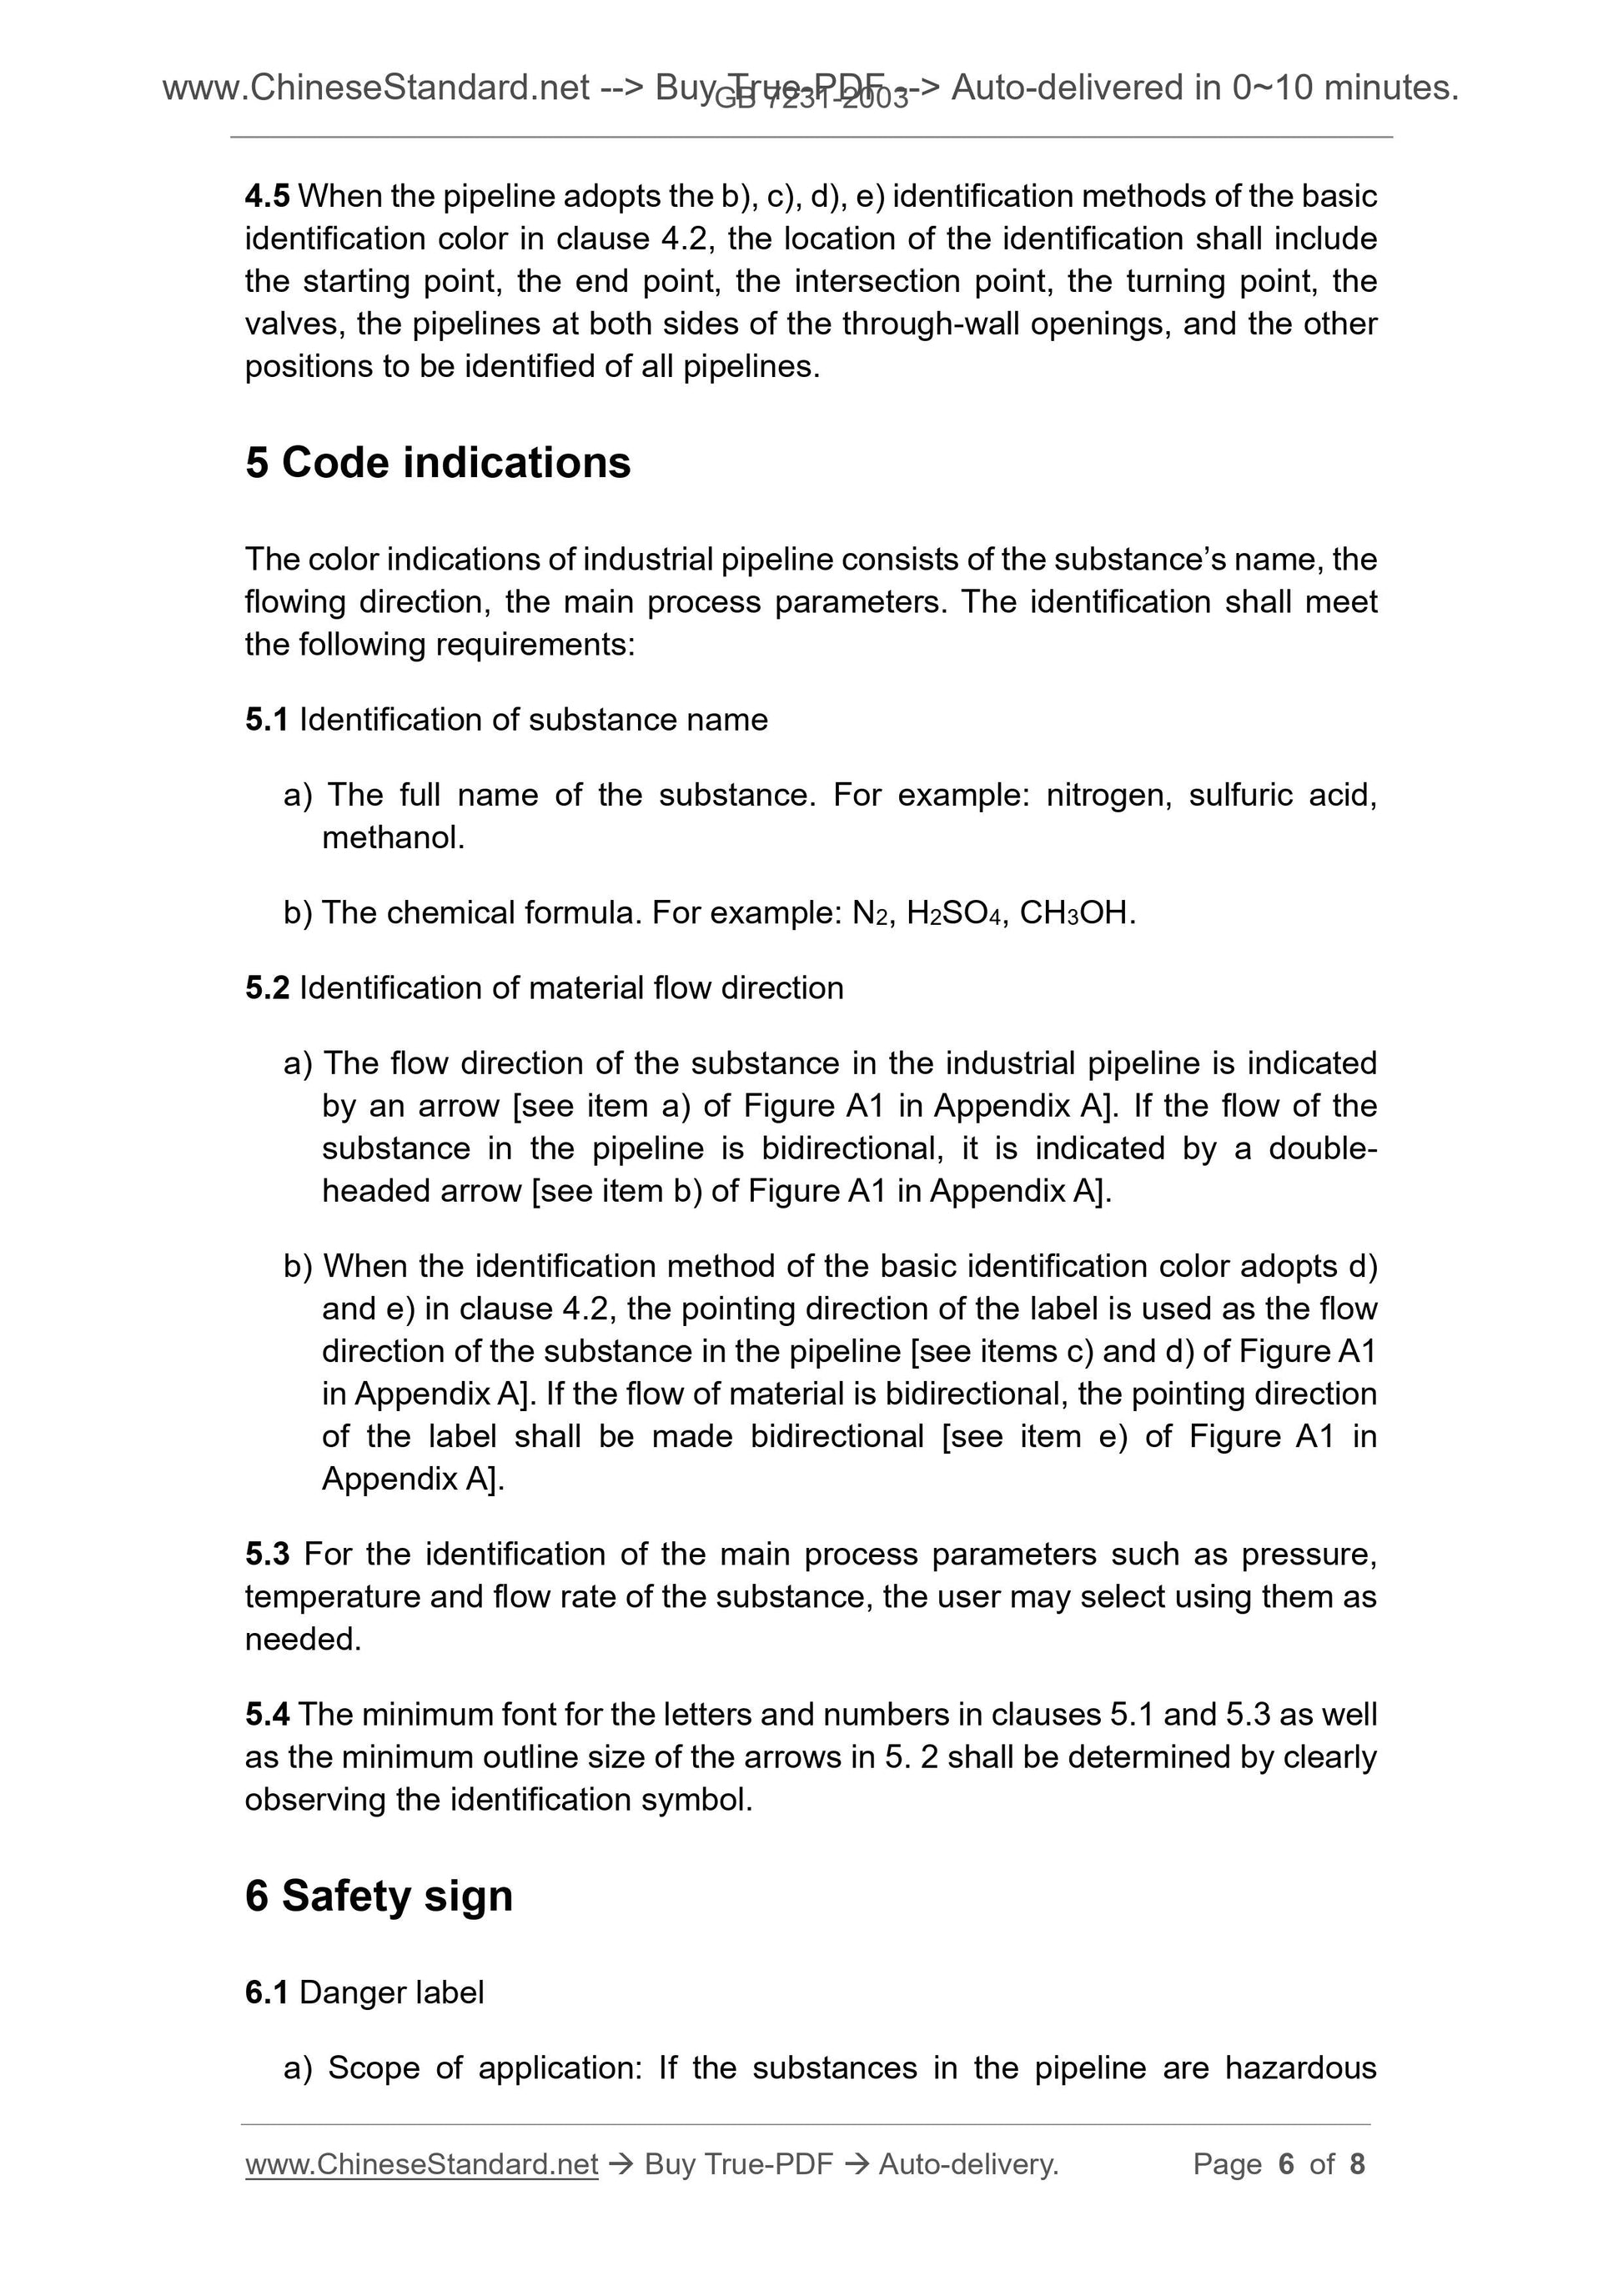 GB 7231-2003 Page 5